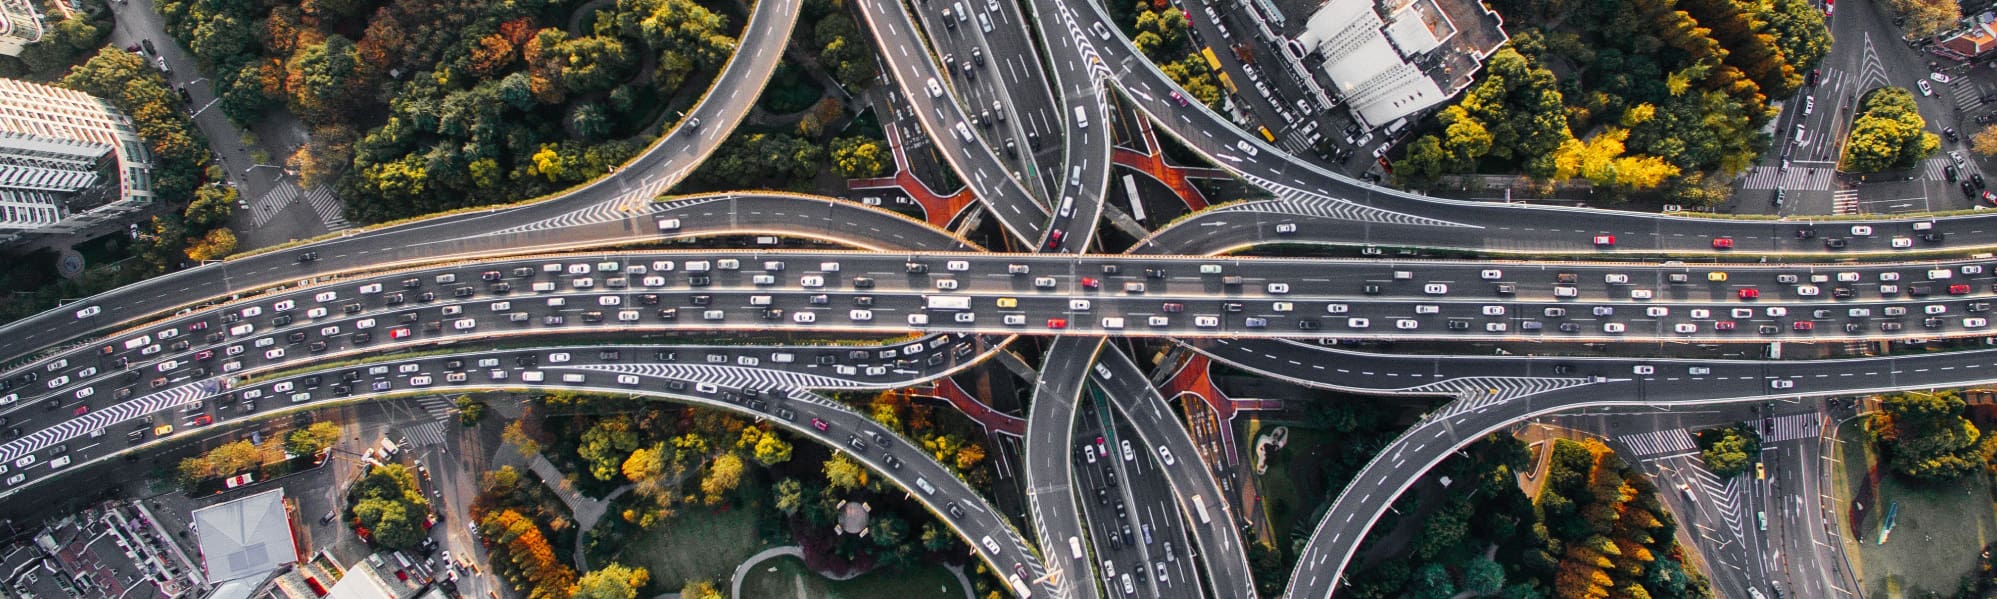 An aerial view of a very busy road intersection